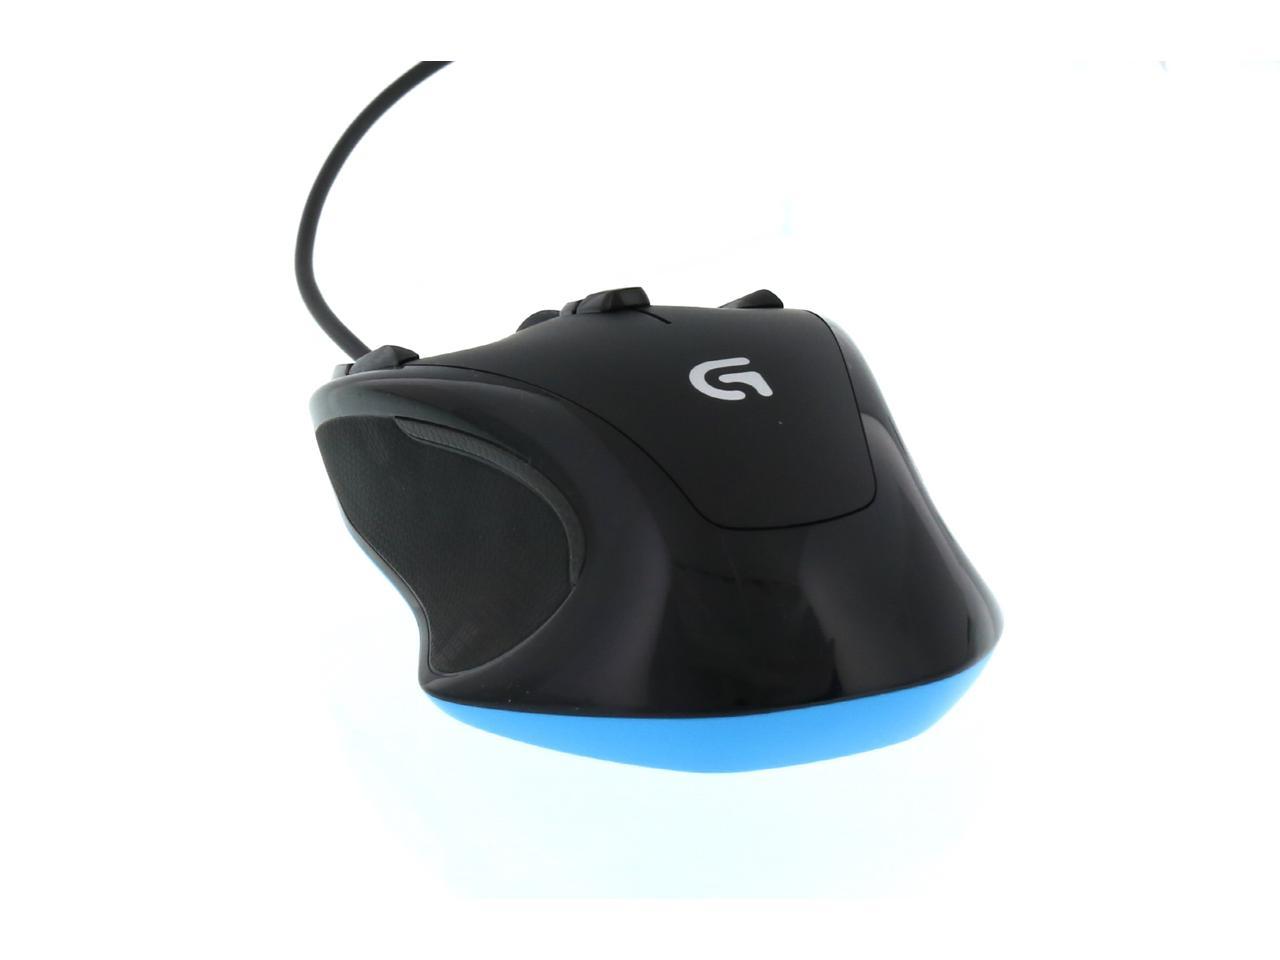 Logitech G300s 910 Wired Optical Gaming Mouse Newegg Com